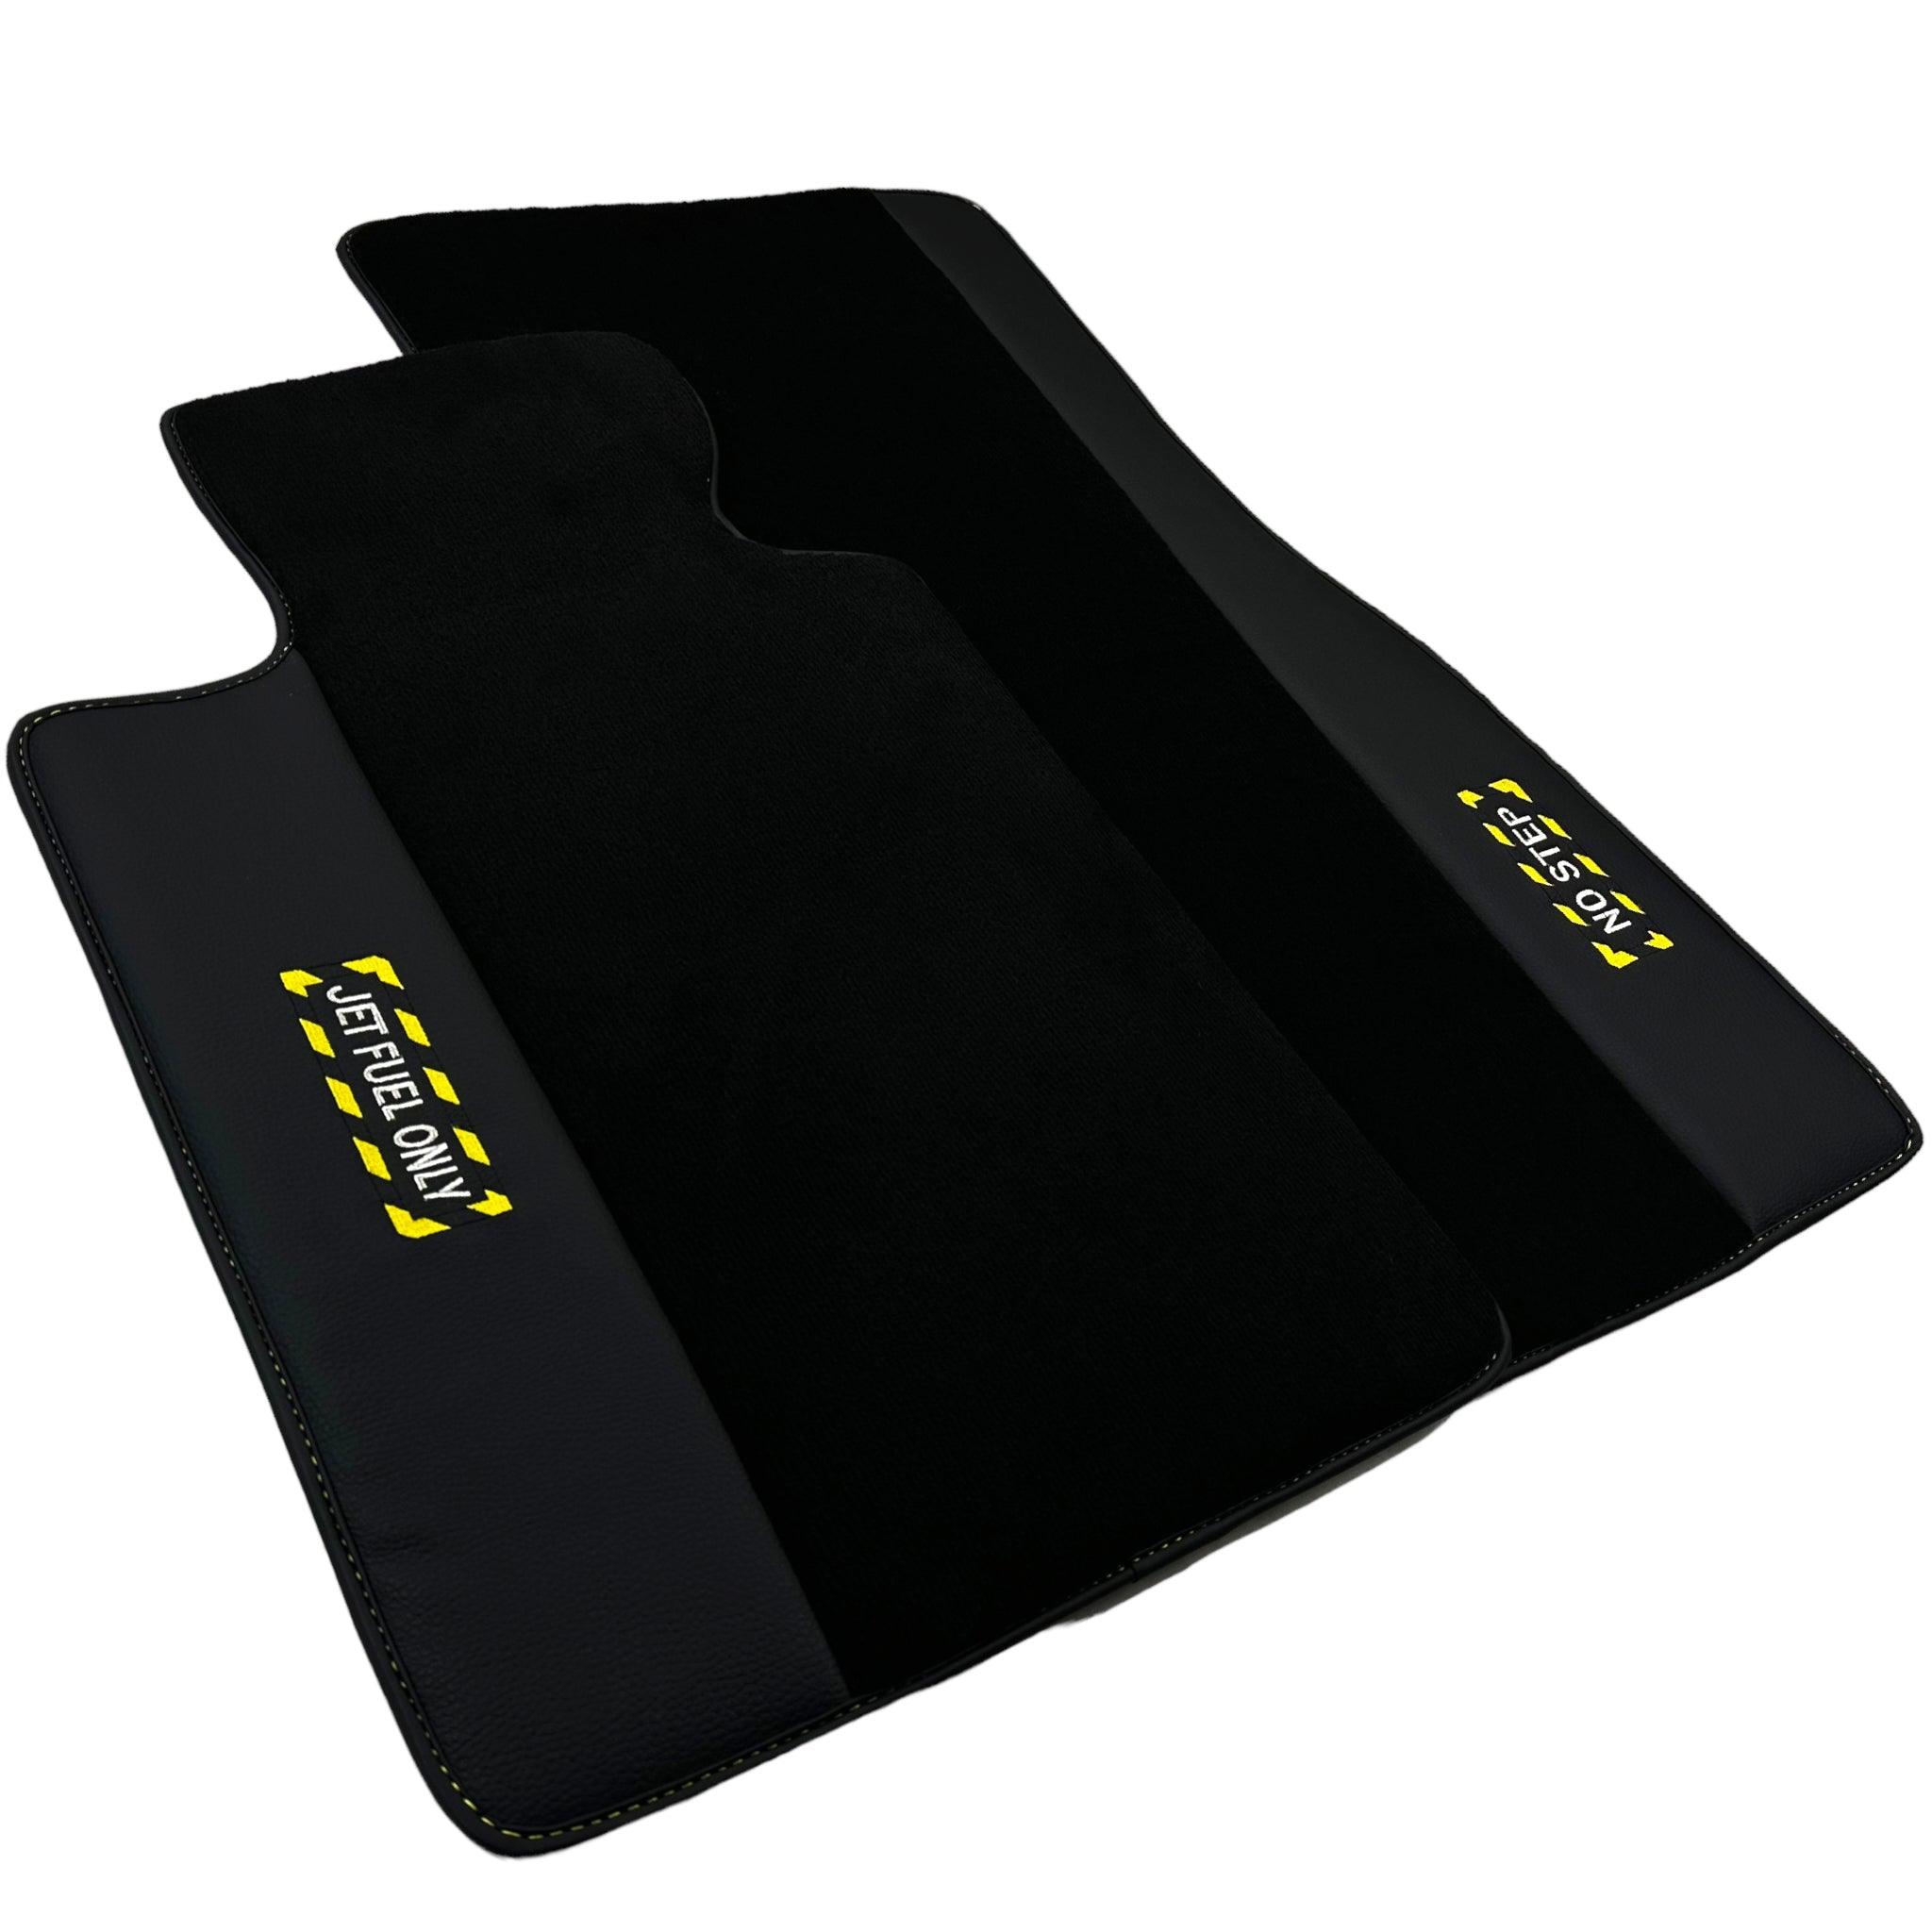 Black Floor Mats For BMW 7 Series E32 | Fighter Jet Edition - AutoWin